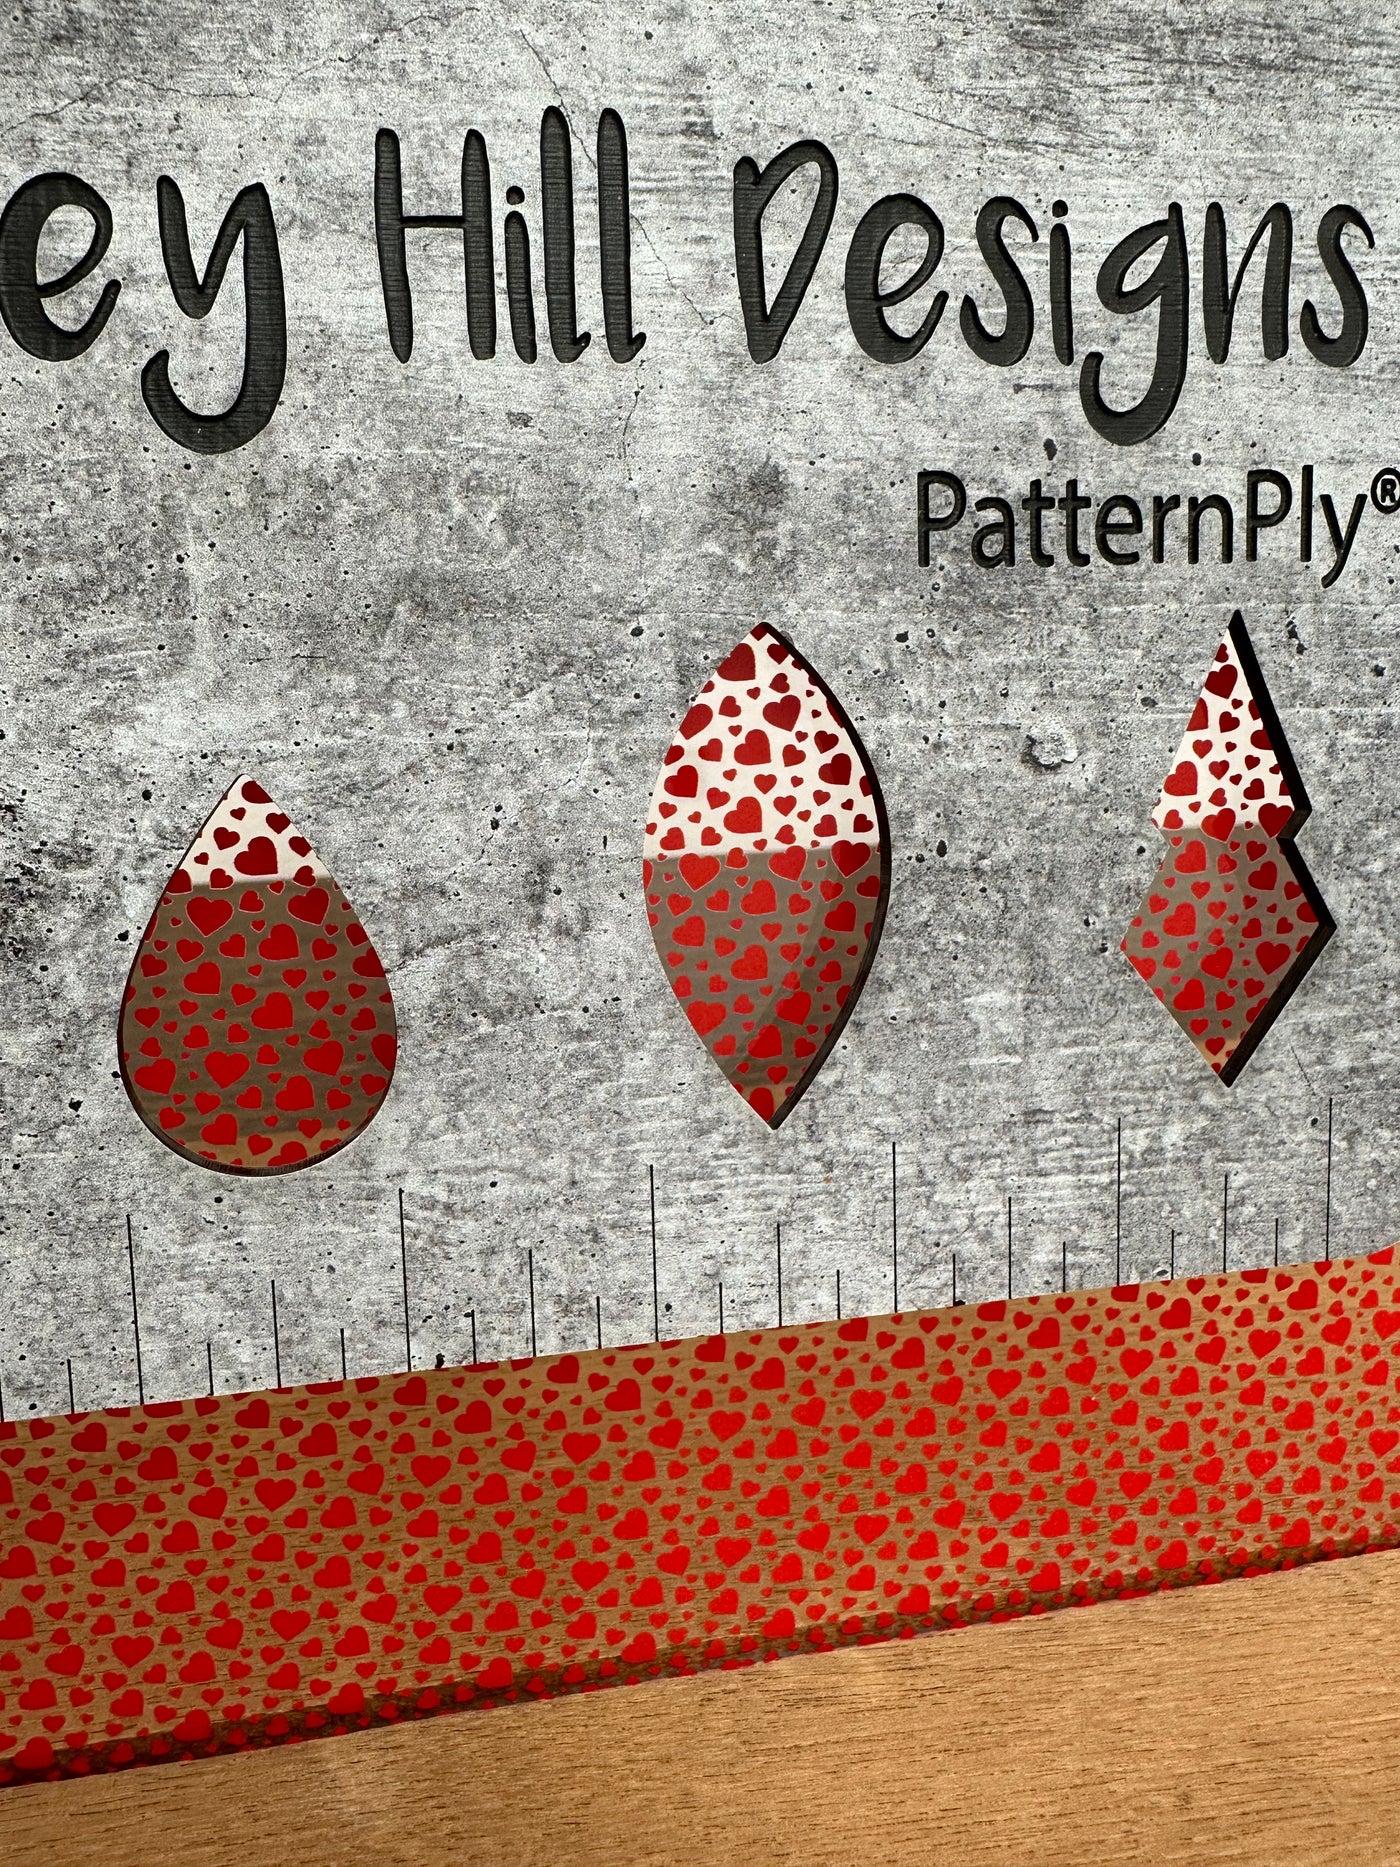 PatternPly® Scattered Micro Red Hearts